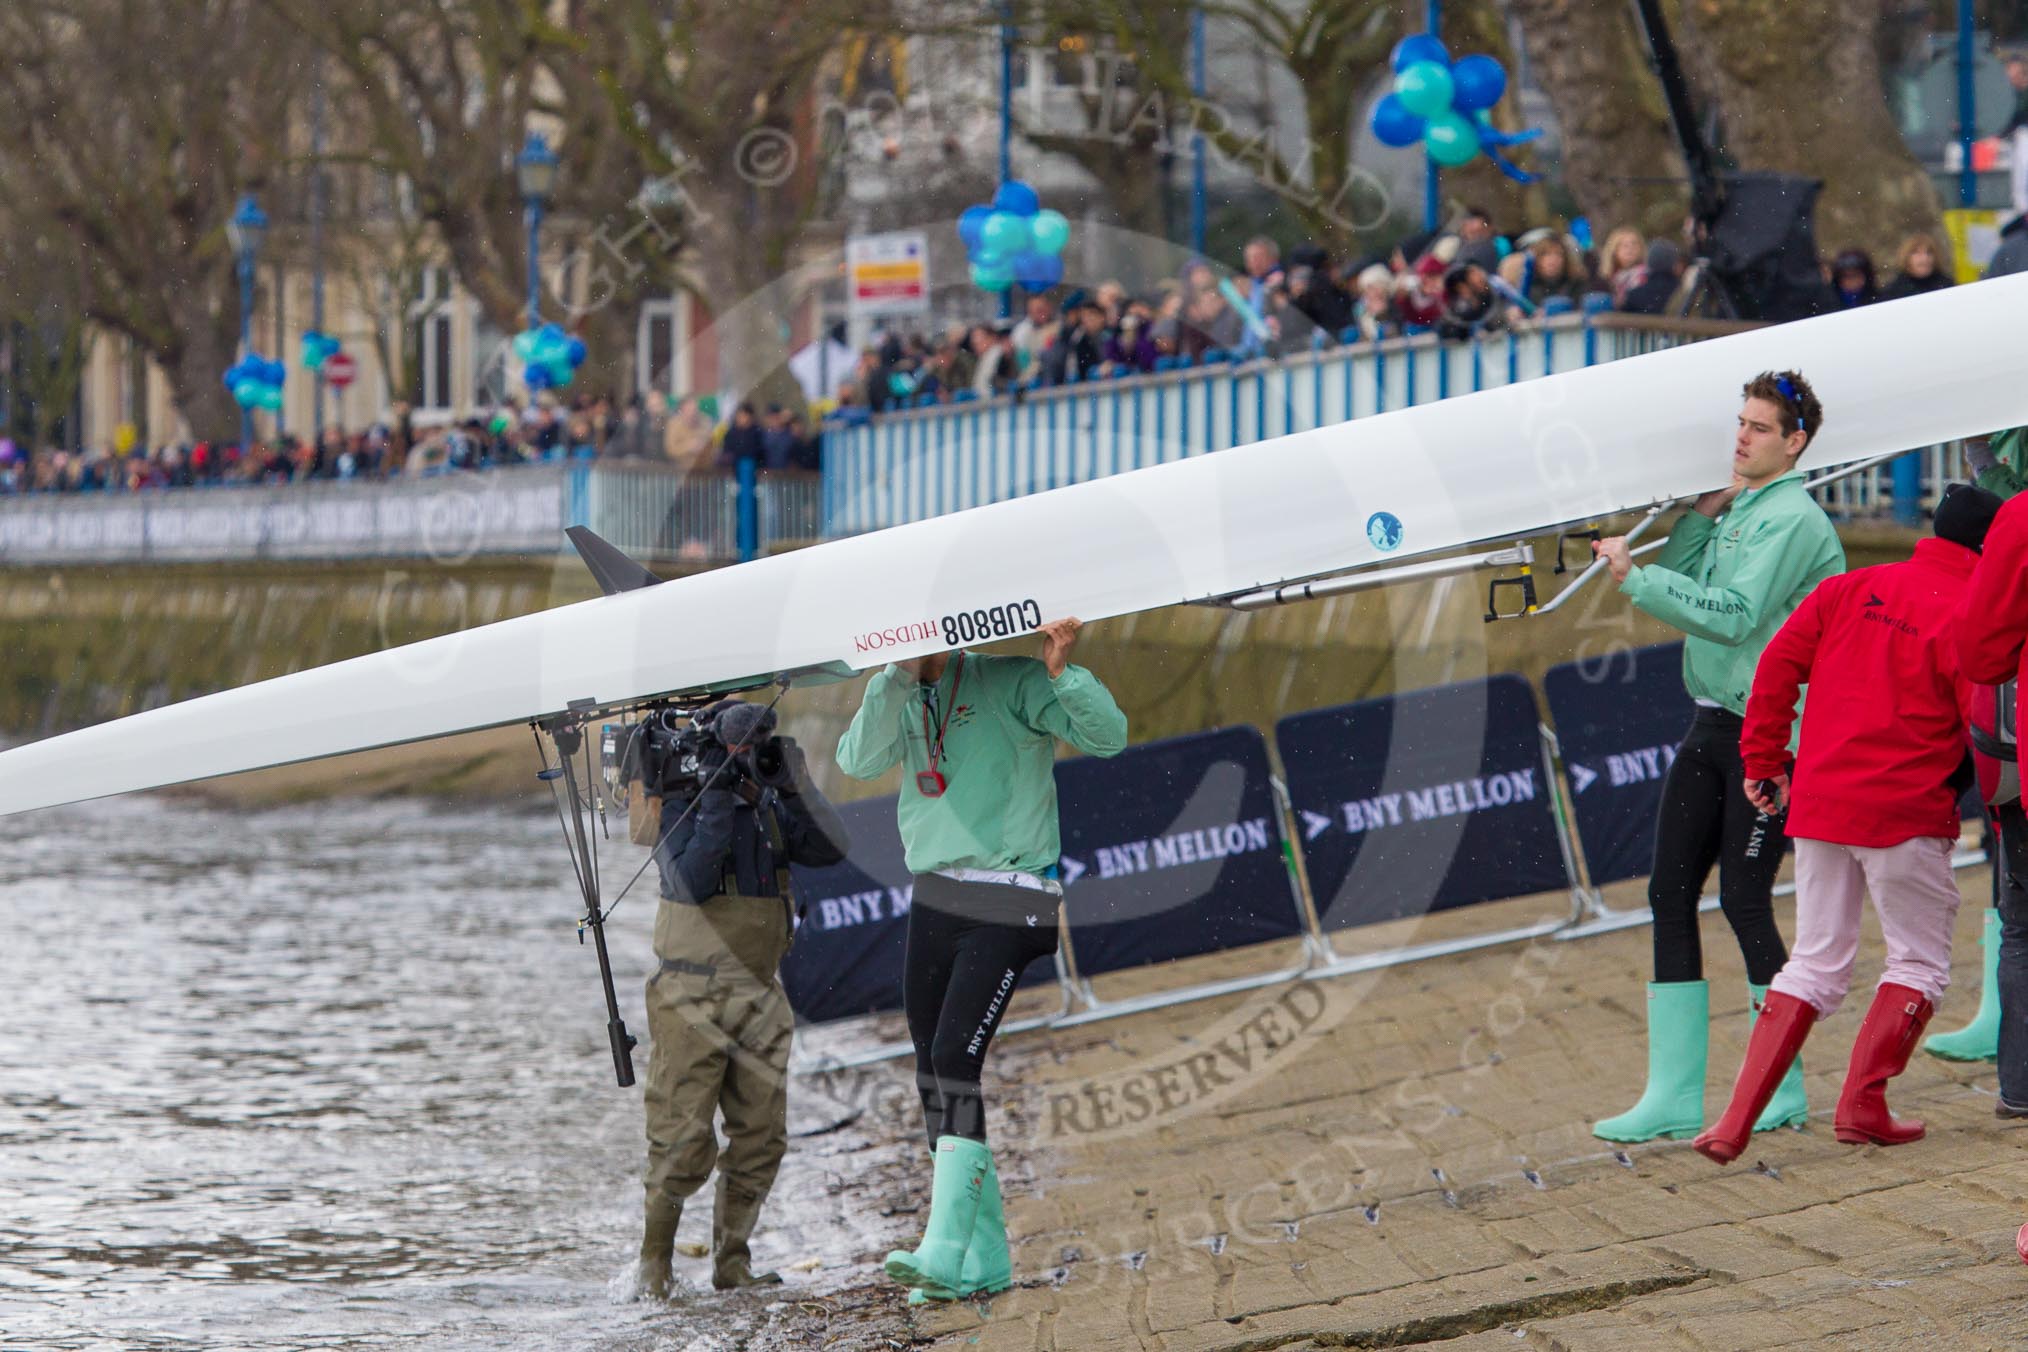 The Boat Race 2013.
Putney,
London SW15,

United Kingdom,
on 31 March 2013 at 15:37, image #138